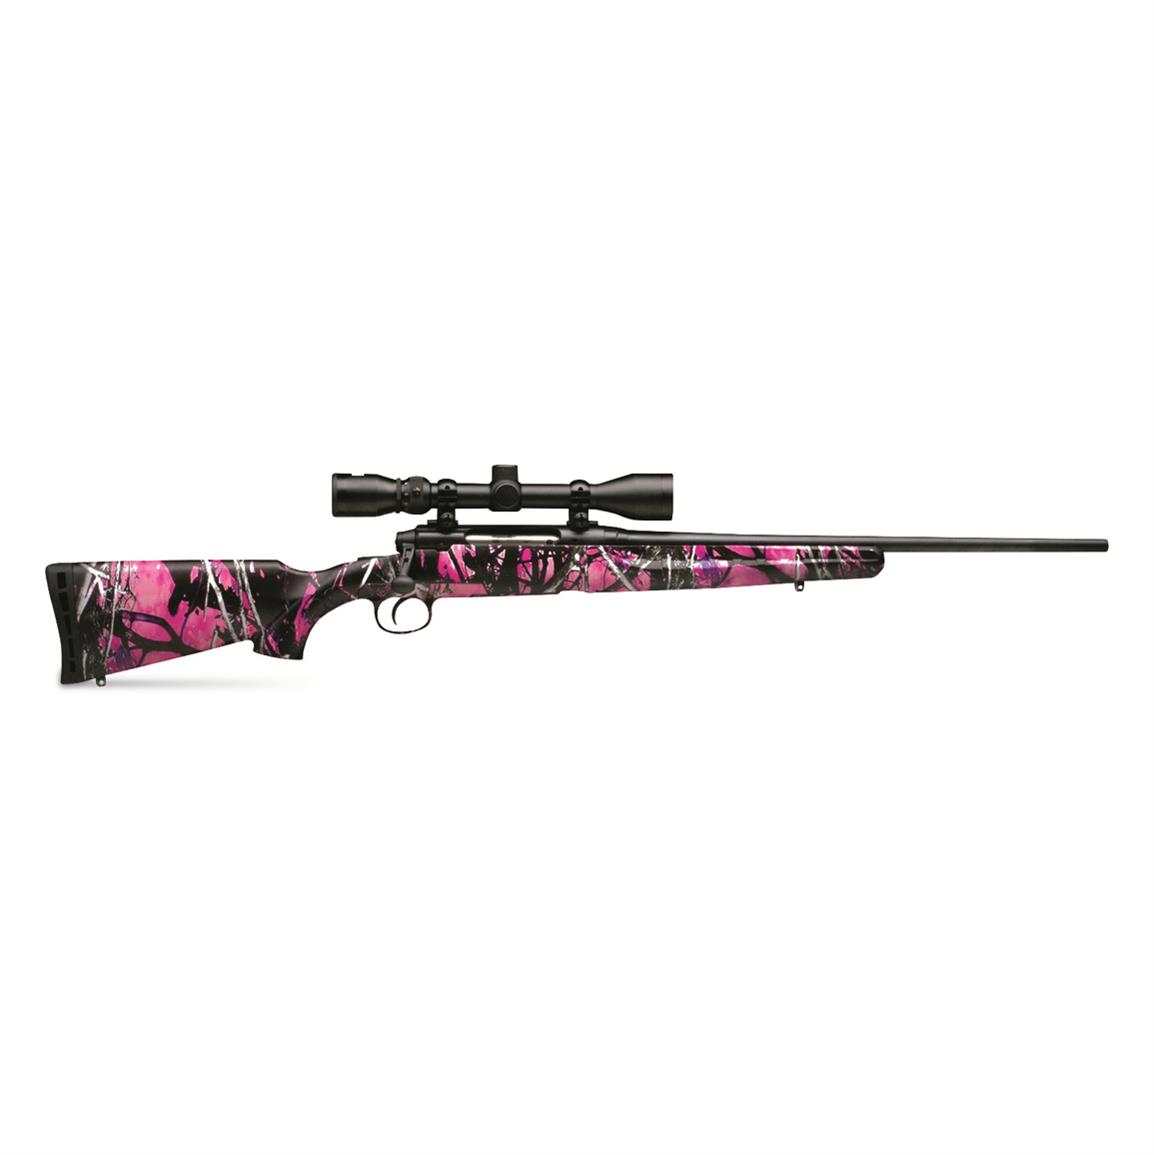 Savage Axis XP Compact, Bolt Action, .243 Win., 20" Barrel, 4+1 Rds., Weaver 3-9x40mm Scope